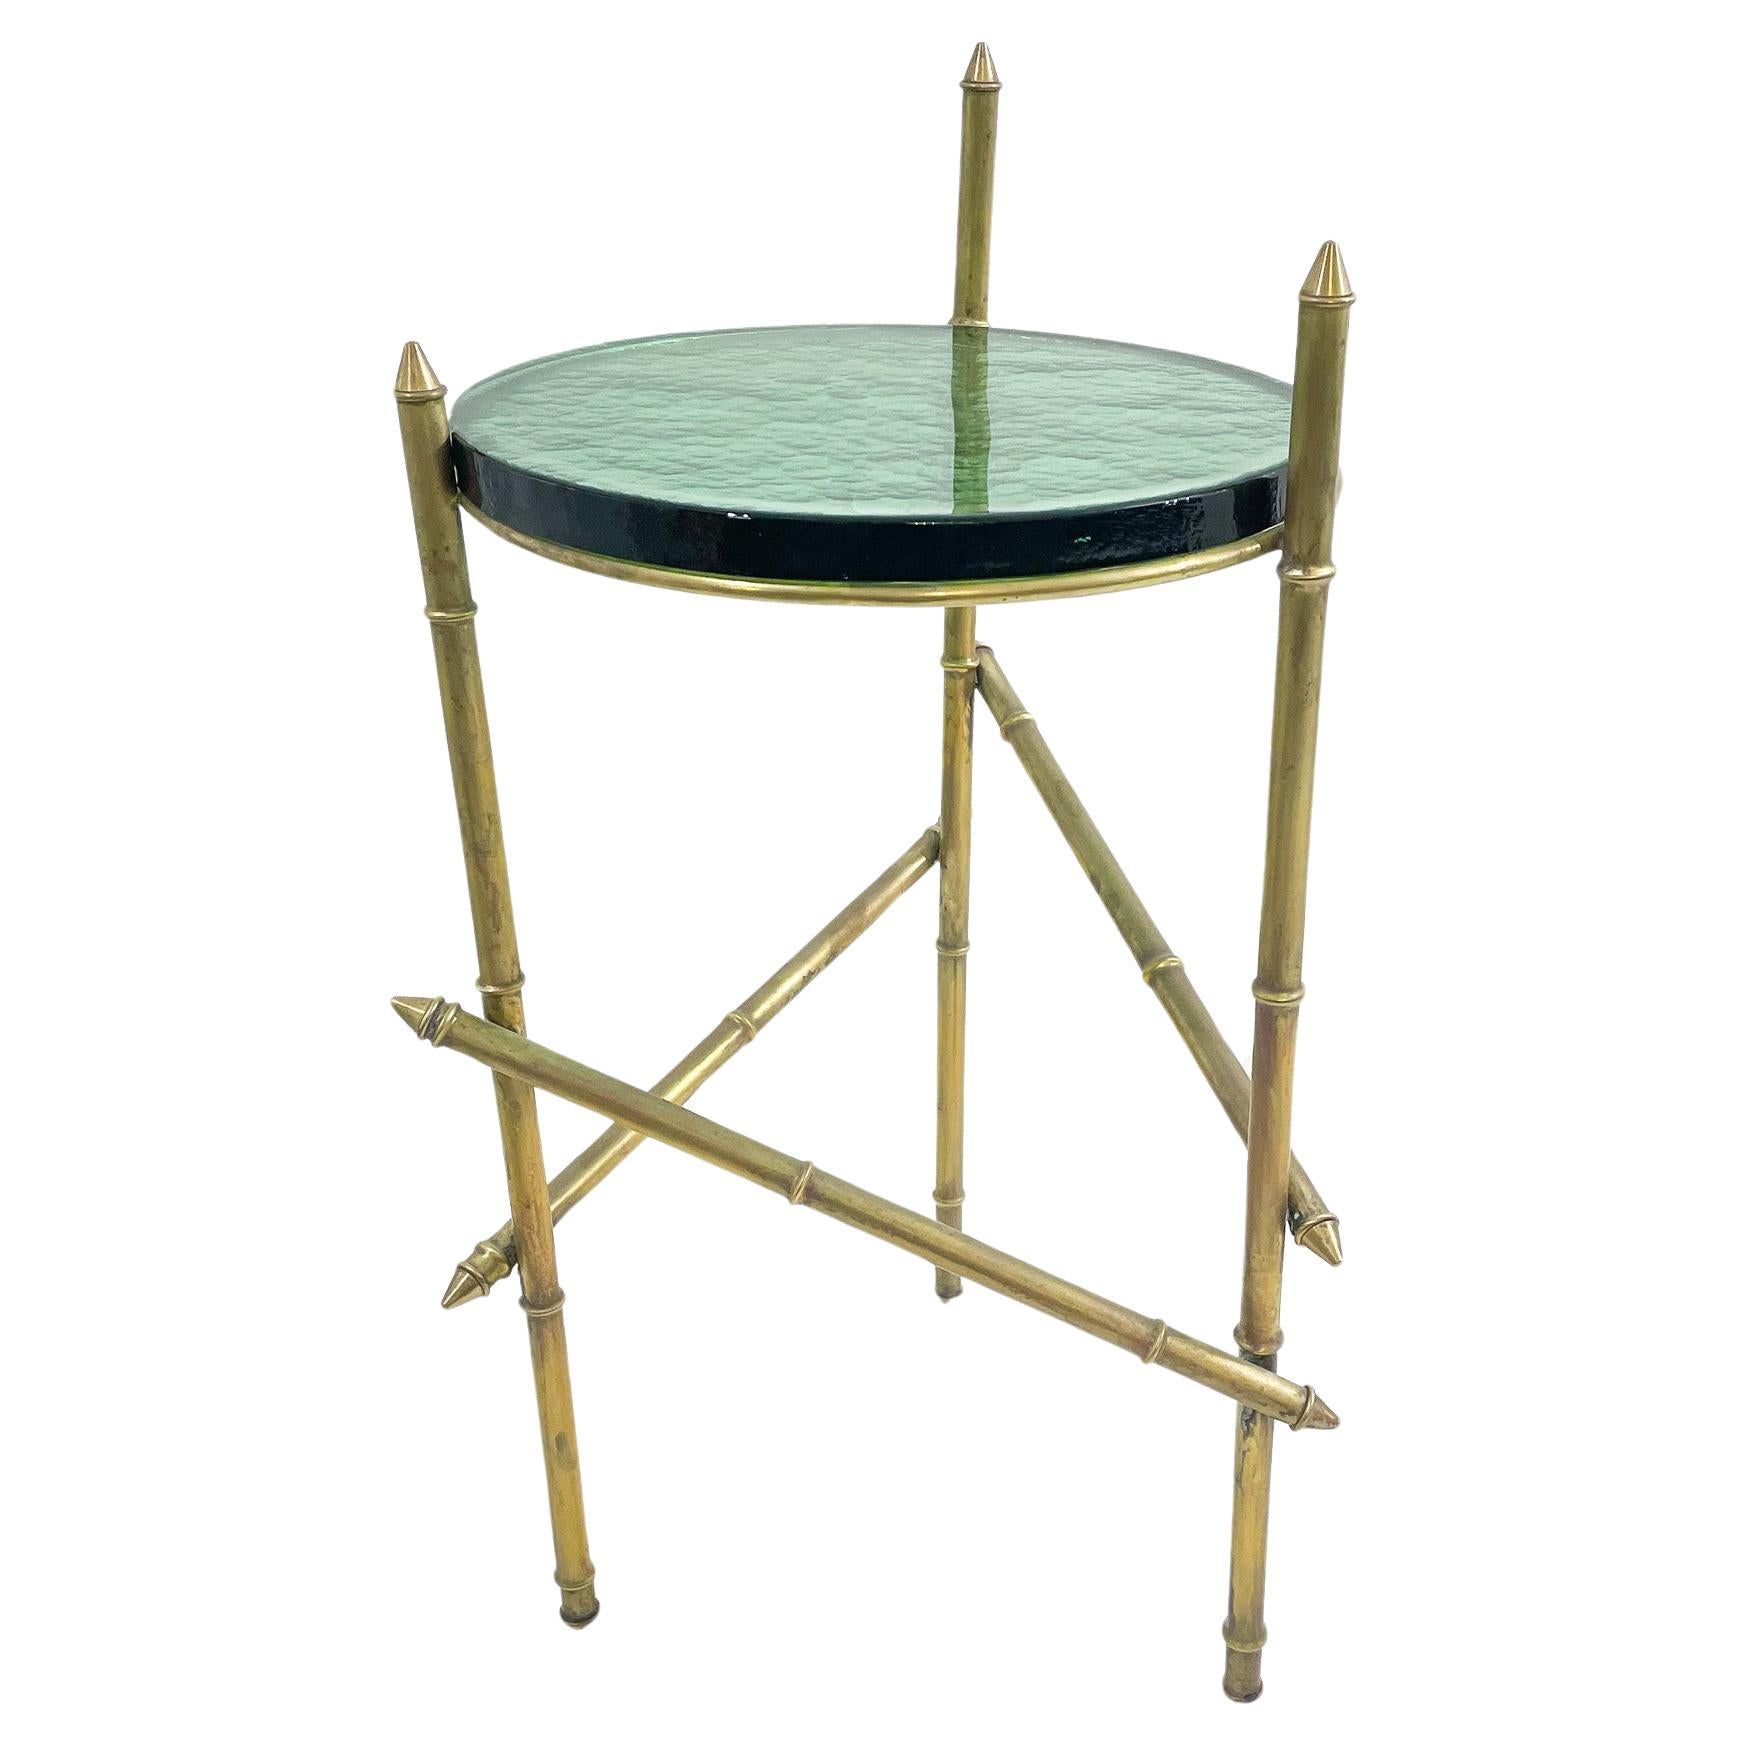 Contemporary Italian Side Table, Messing und Glas